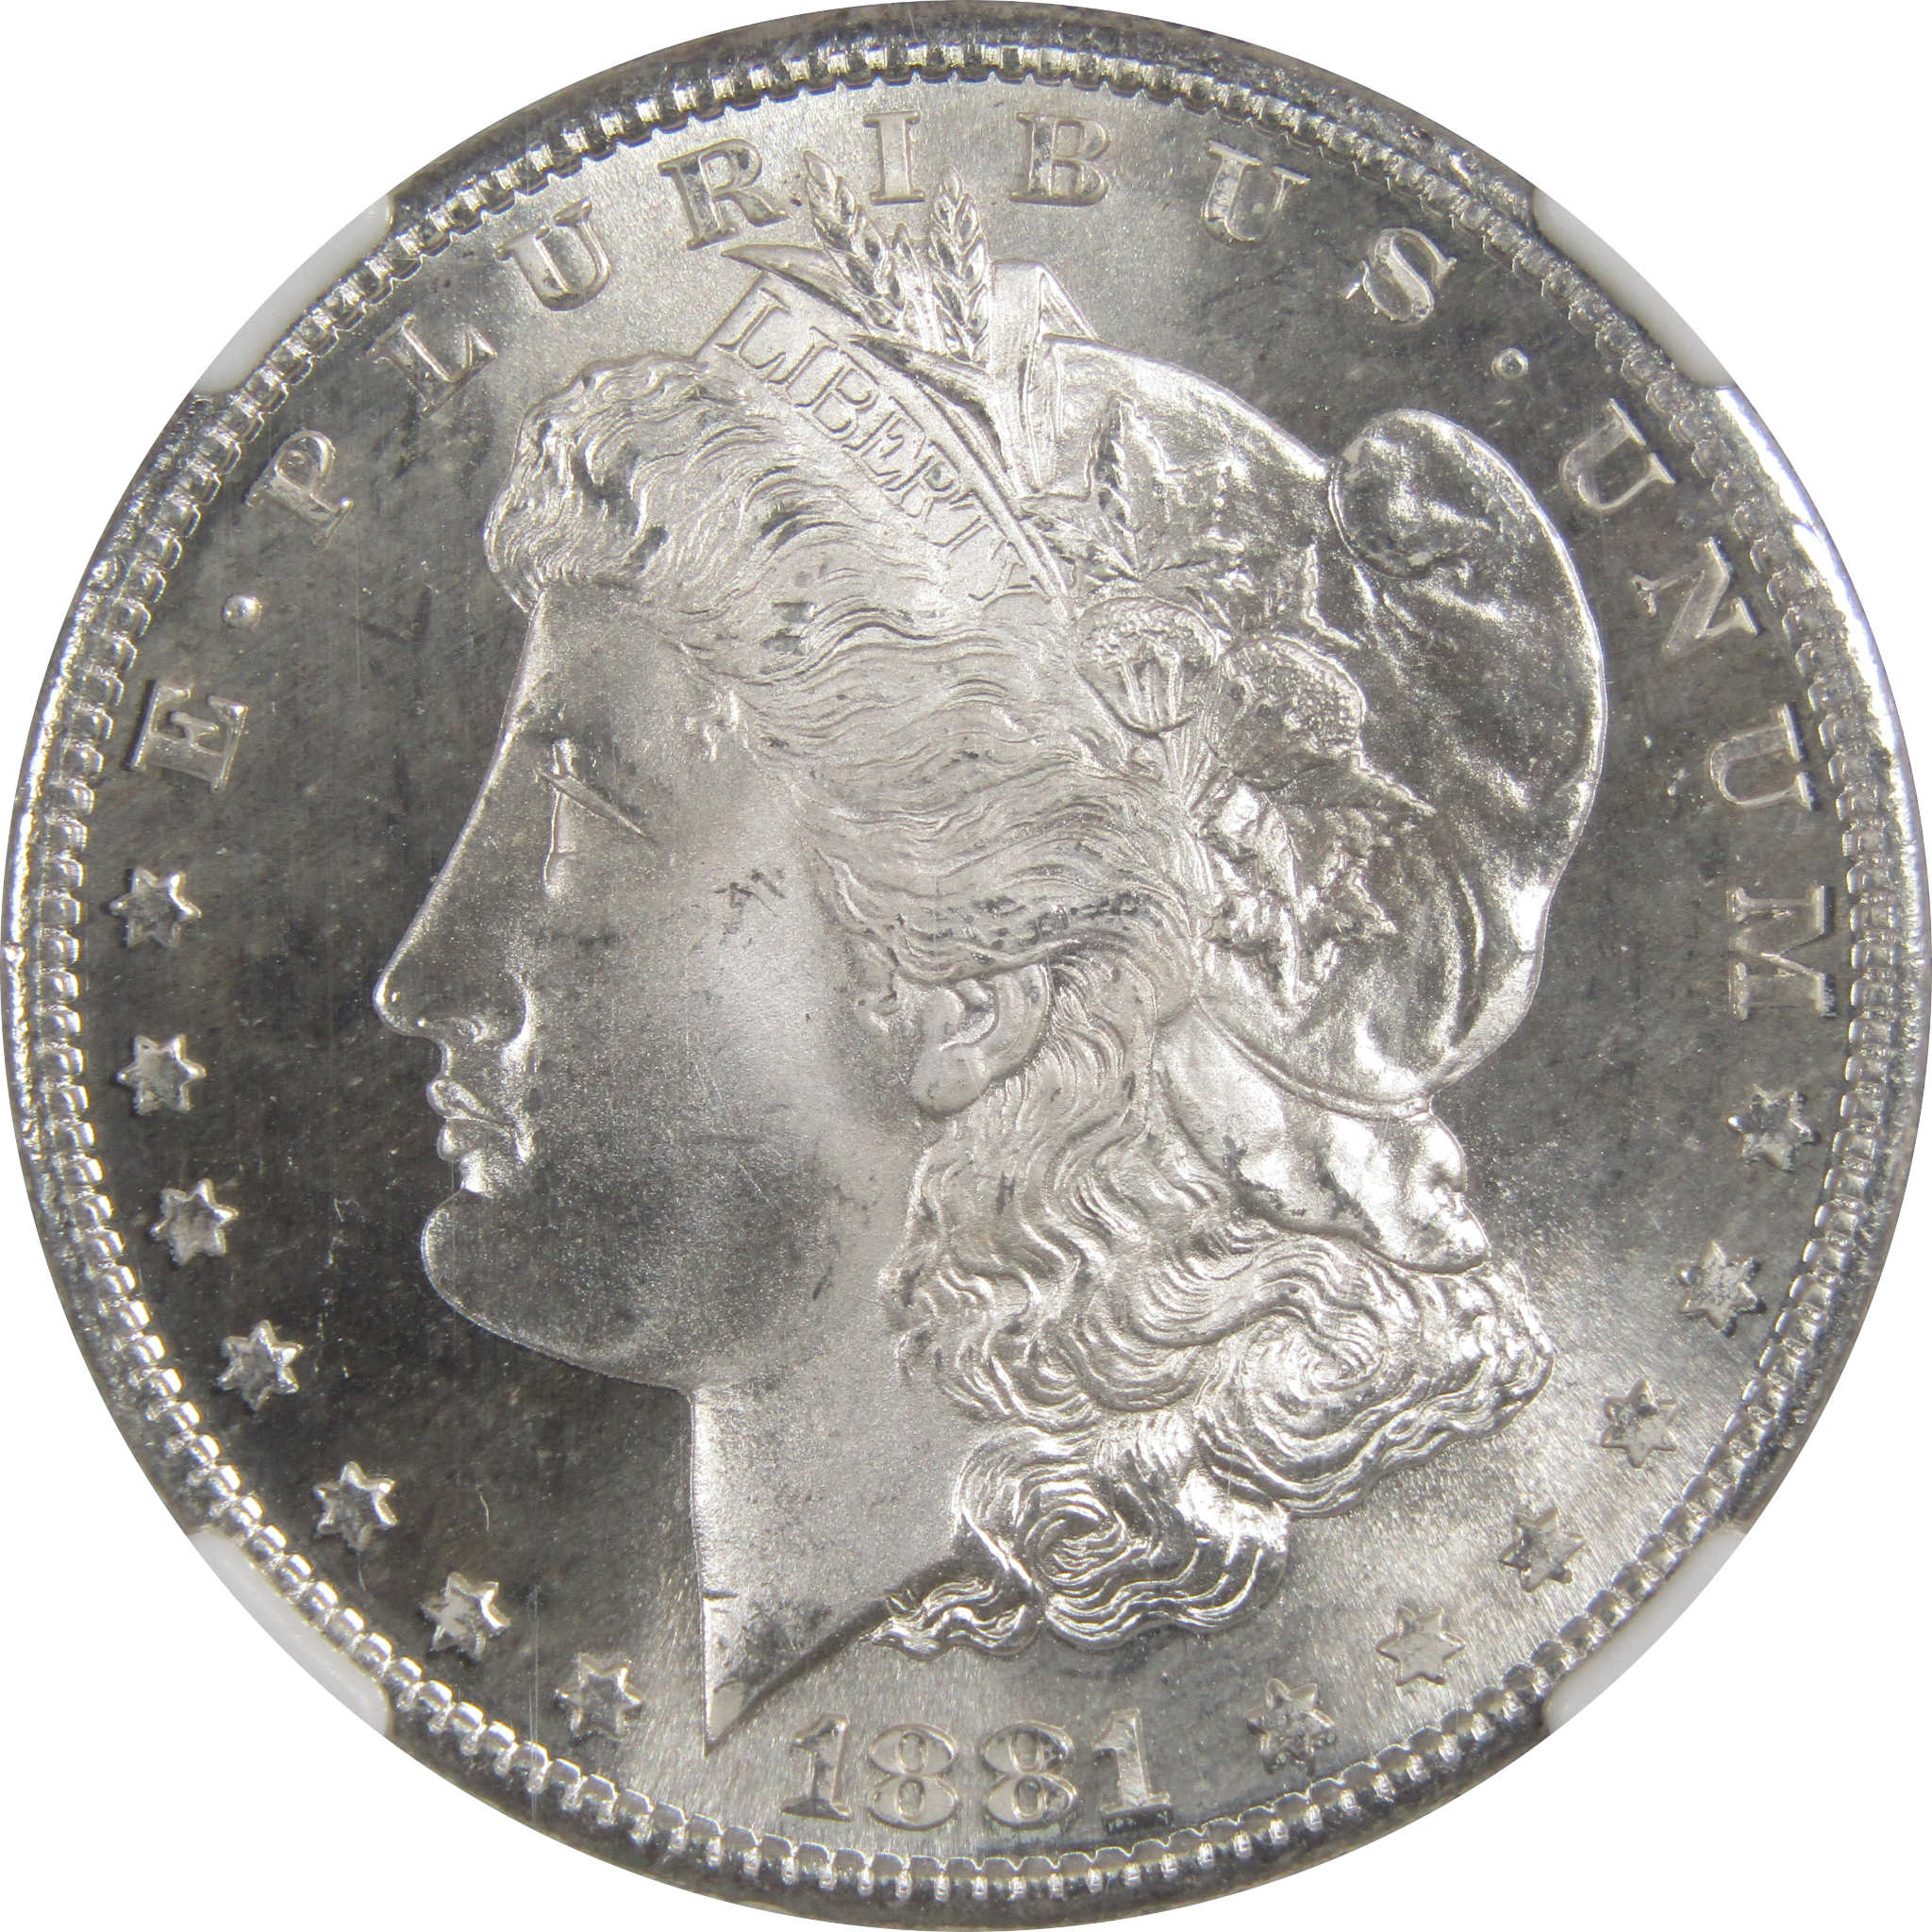 1881 S Morgan Dollar MS 67 NGC 90% Silver Uncirculated SKU:IPC7197 - Morgan coin - Morgan silver dollar - Morgan silver dollar for sale - Profile Coins &amp; Collectibles